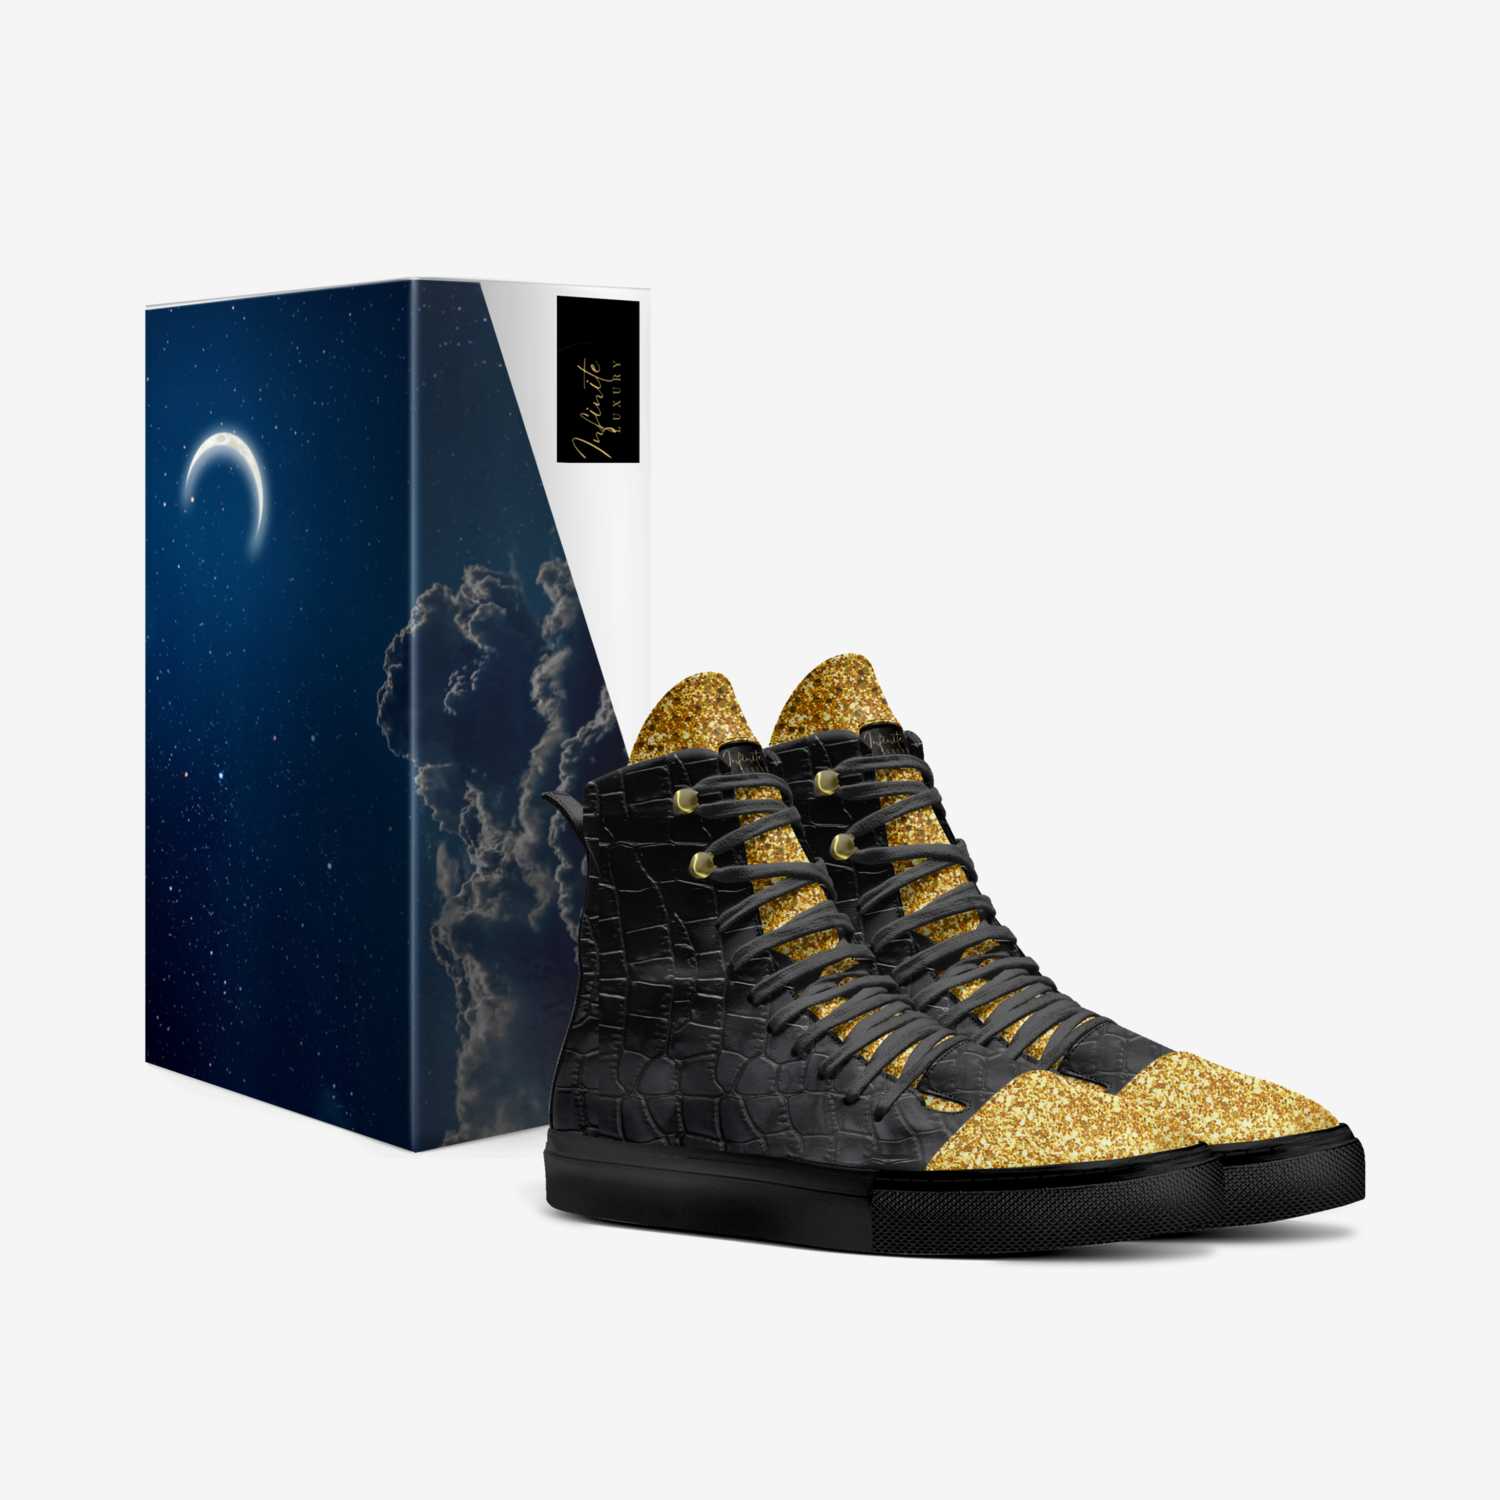 Moonwalker Blk&Gld custom made in Italy shoes by Curtis Robinson | Box view